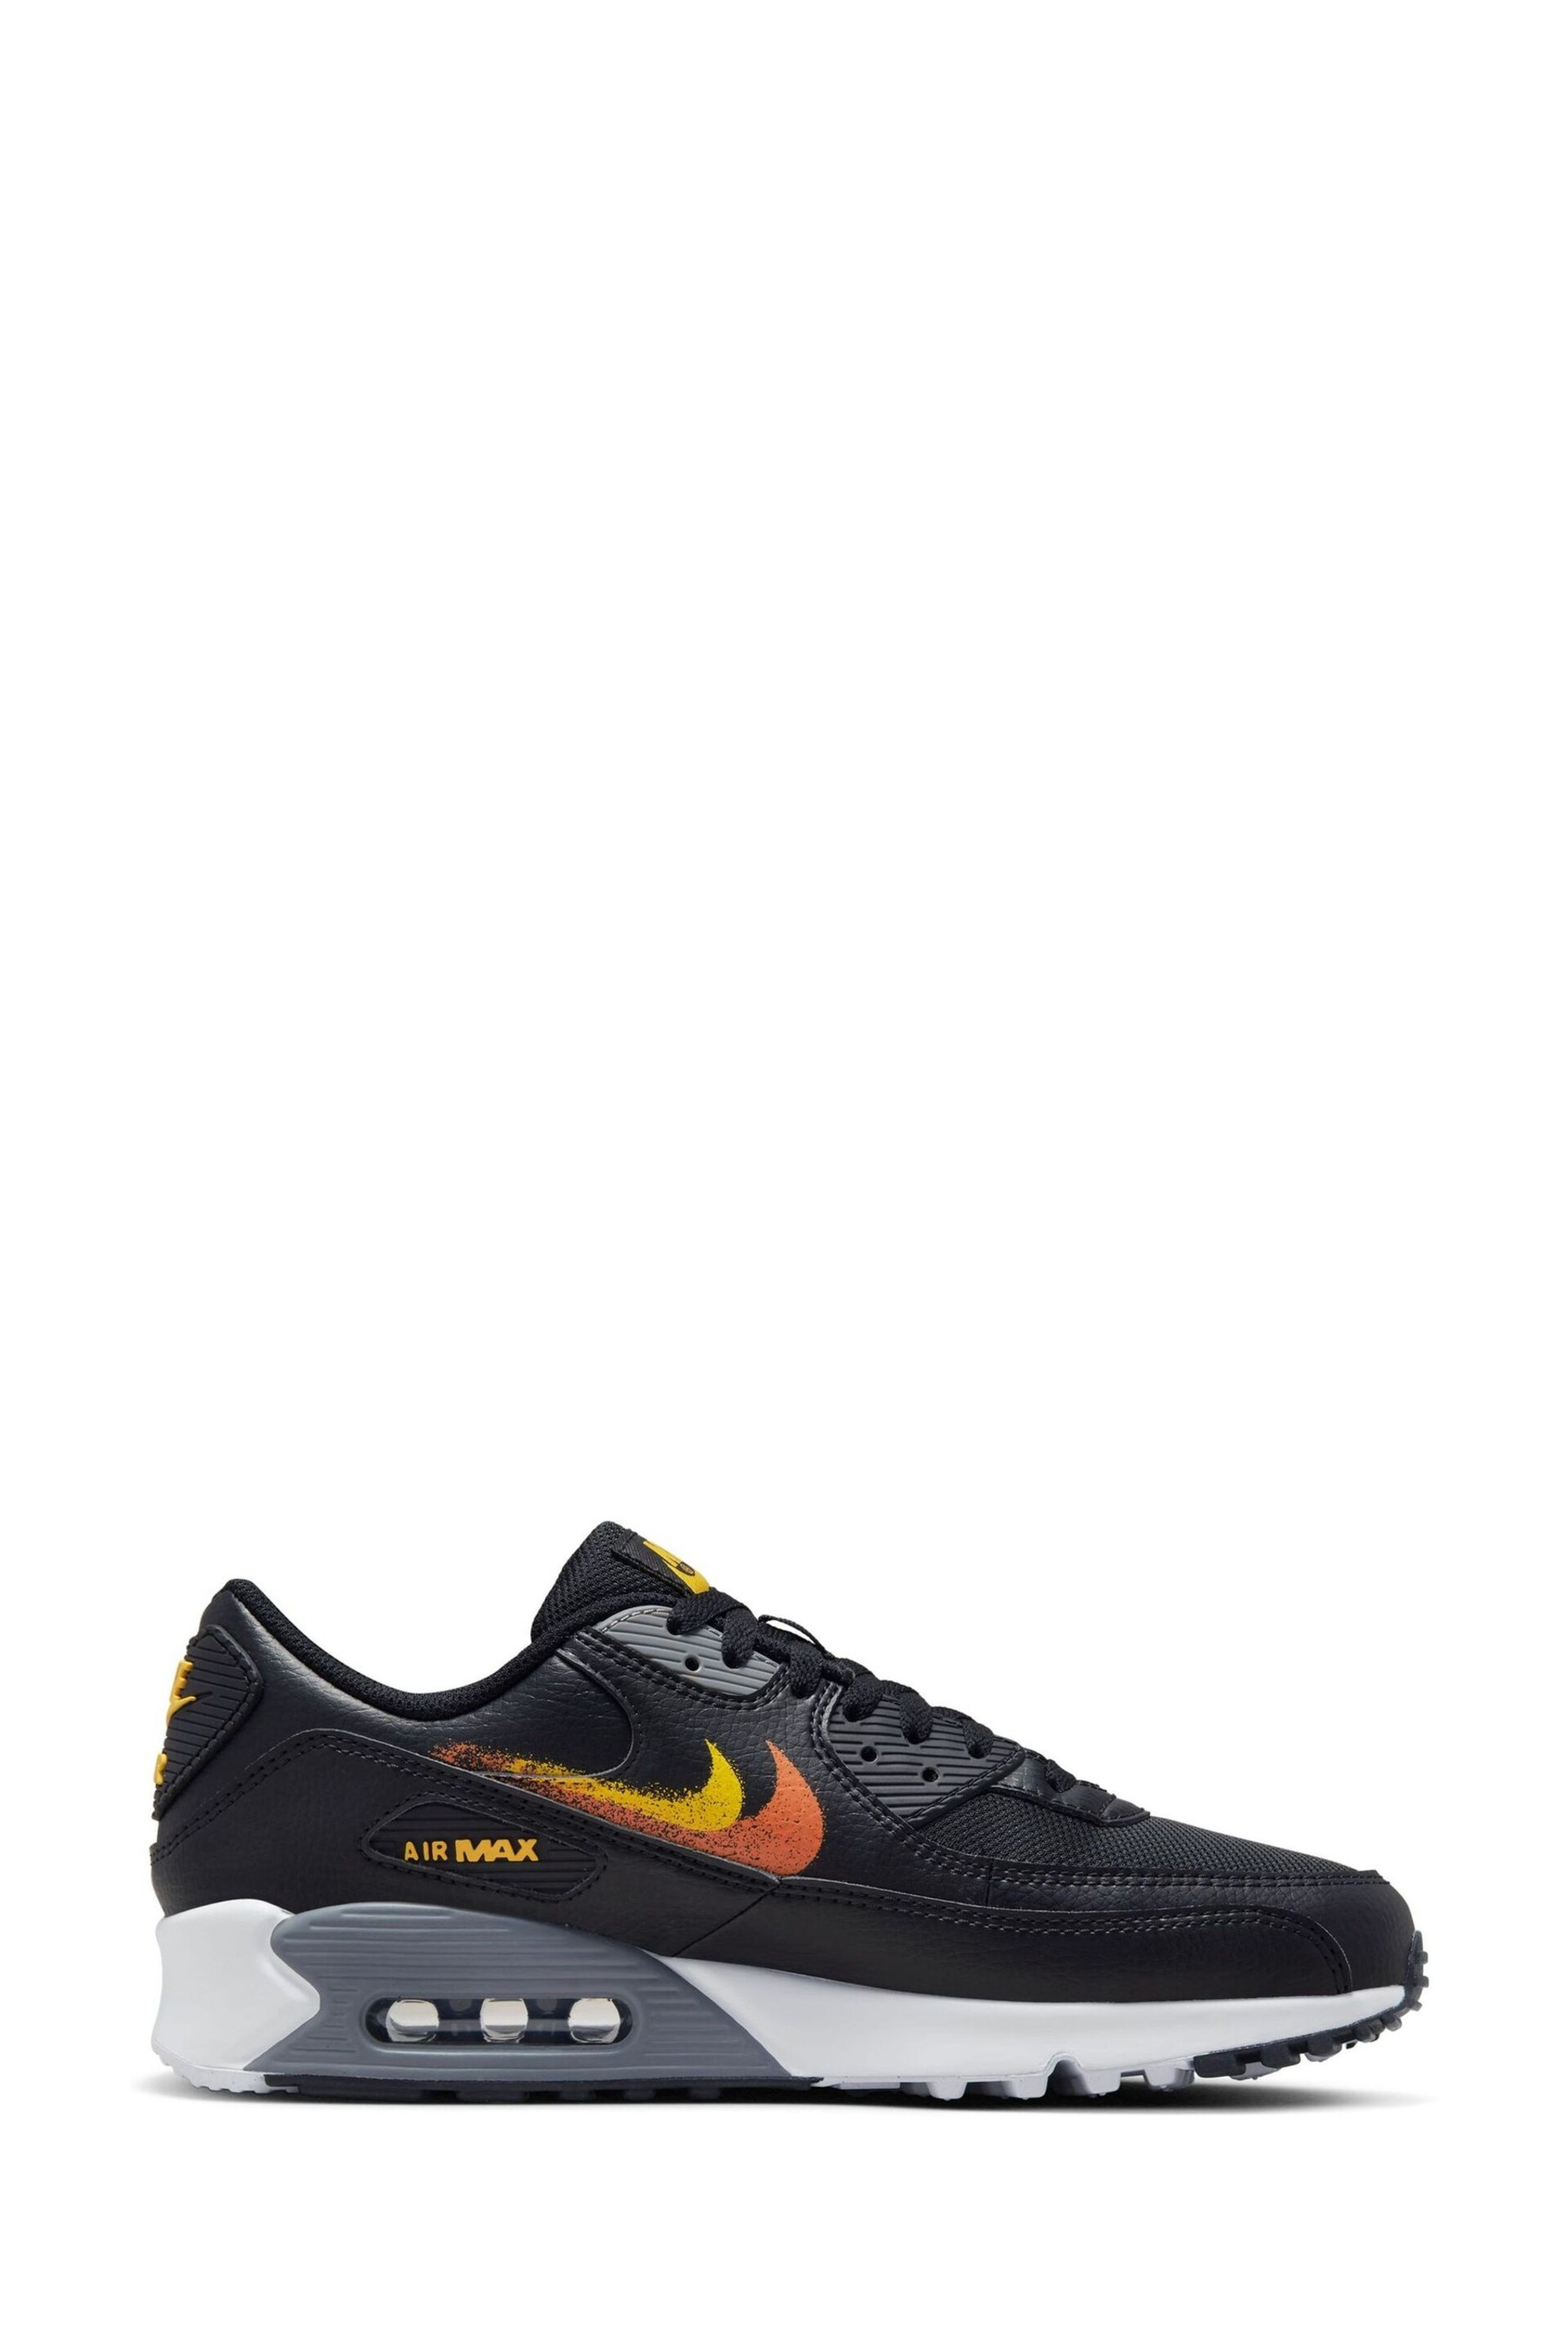 Nike Black/Gold Air Max 90 Trainers - Image 3 of 10